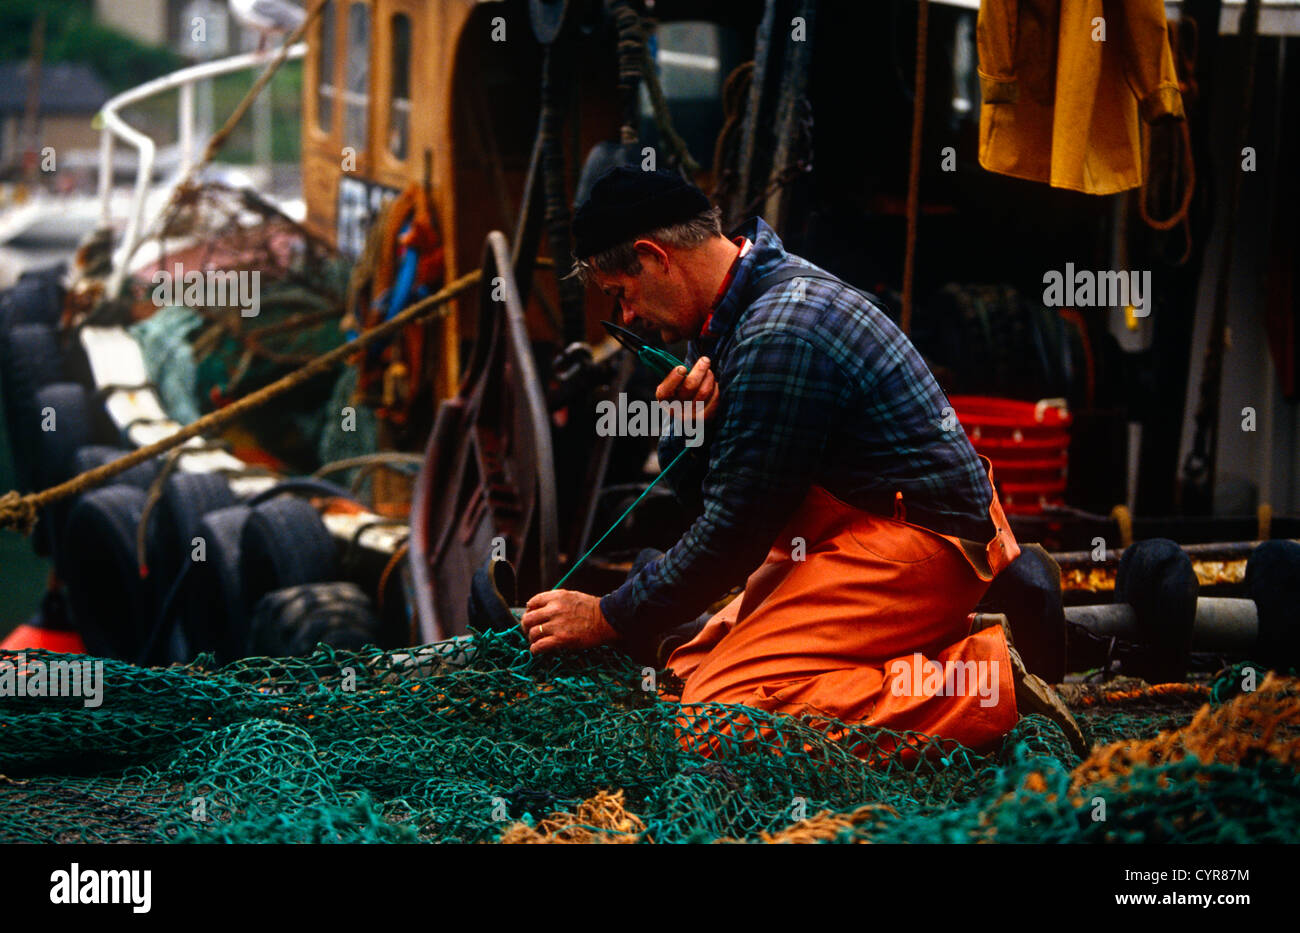 With his boat in the background, a fishermen repairs his nets on the quayside after a night at sea in Tarbert, Mull of Kintyre. Stock Photo